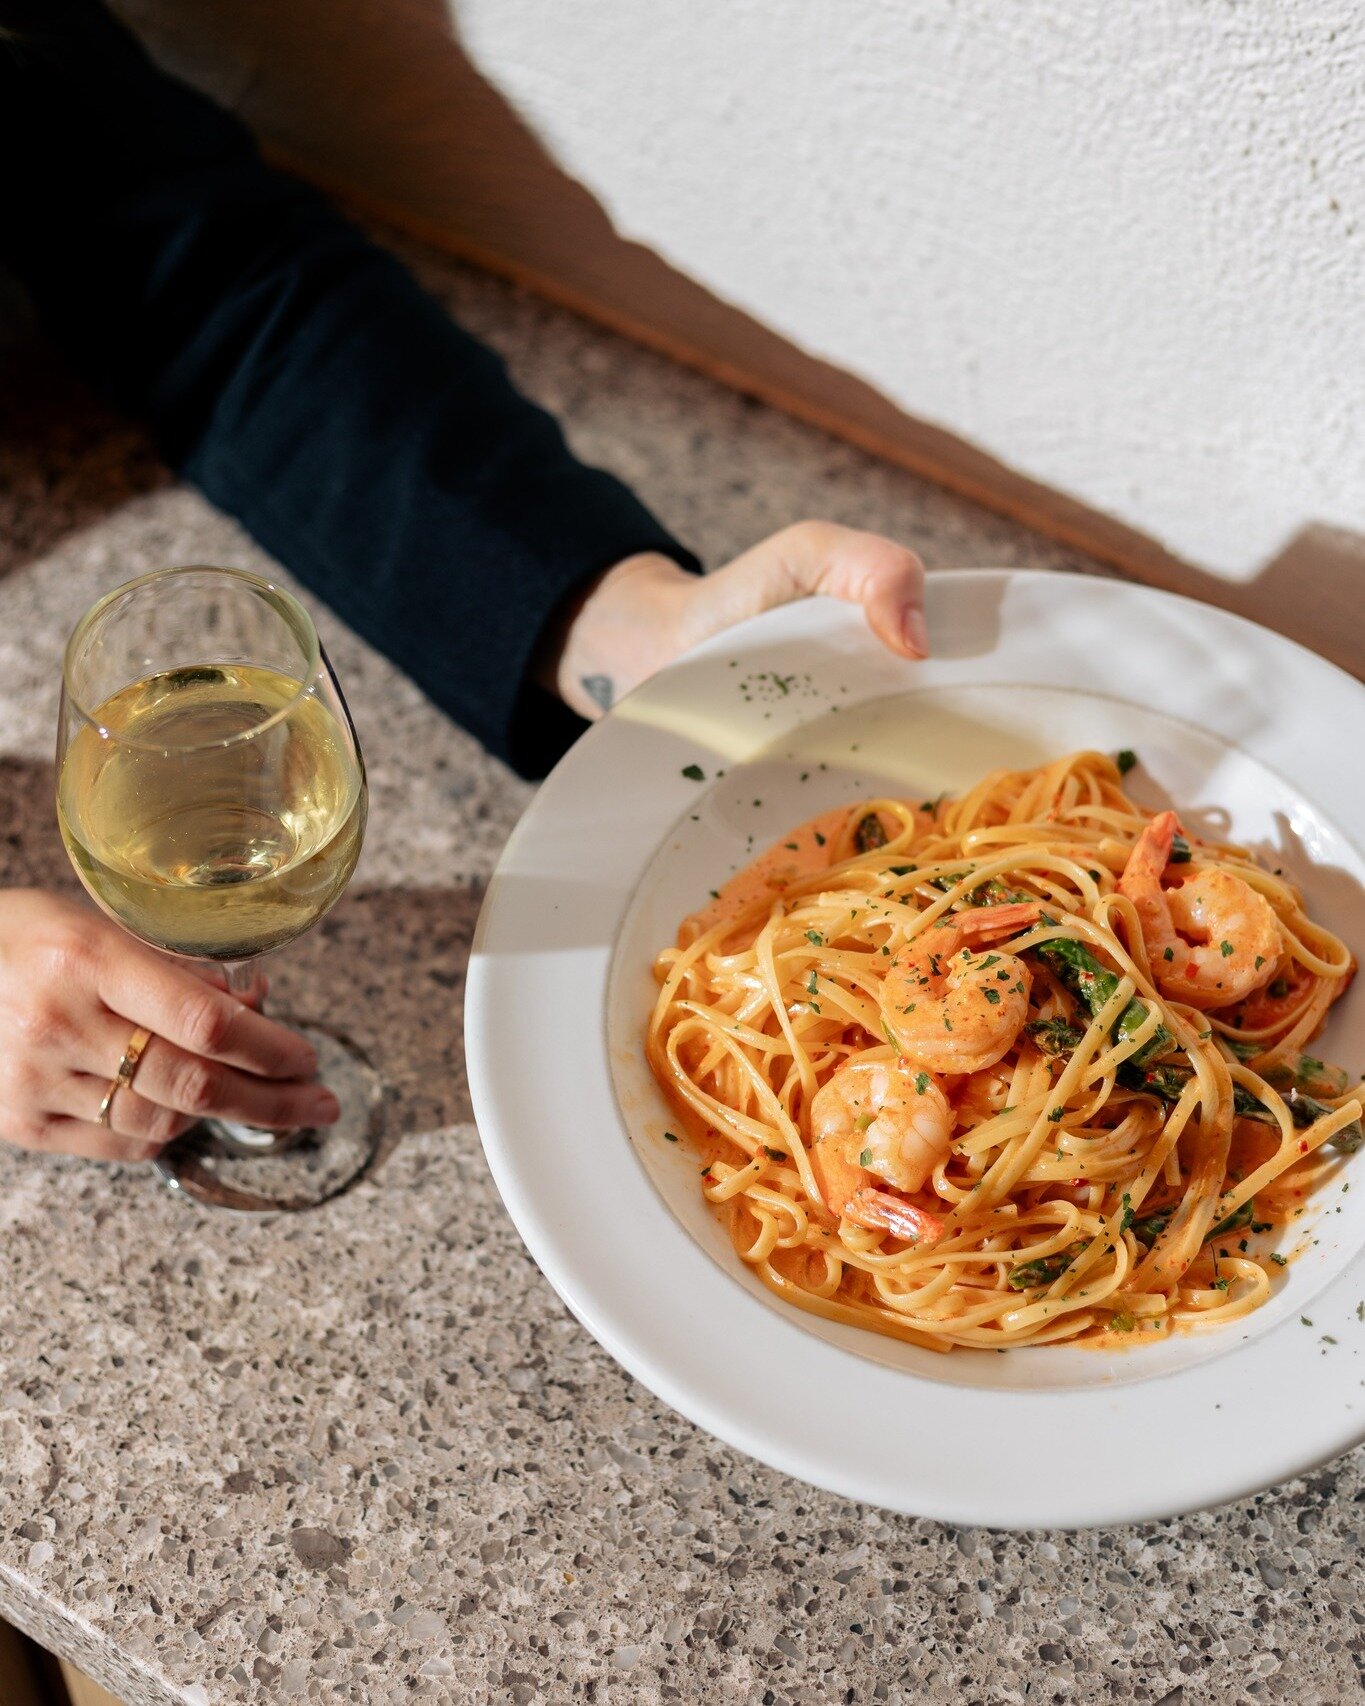 Come one, come all for a culinary experience like no other! Our delicious Prawn Linguine is the star of tonight's show - featuring succulent prawns and expertly seasoned asparagus with chilli and shallots in a creamy white wine sauce. 👌

Reserve you